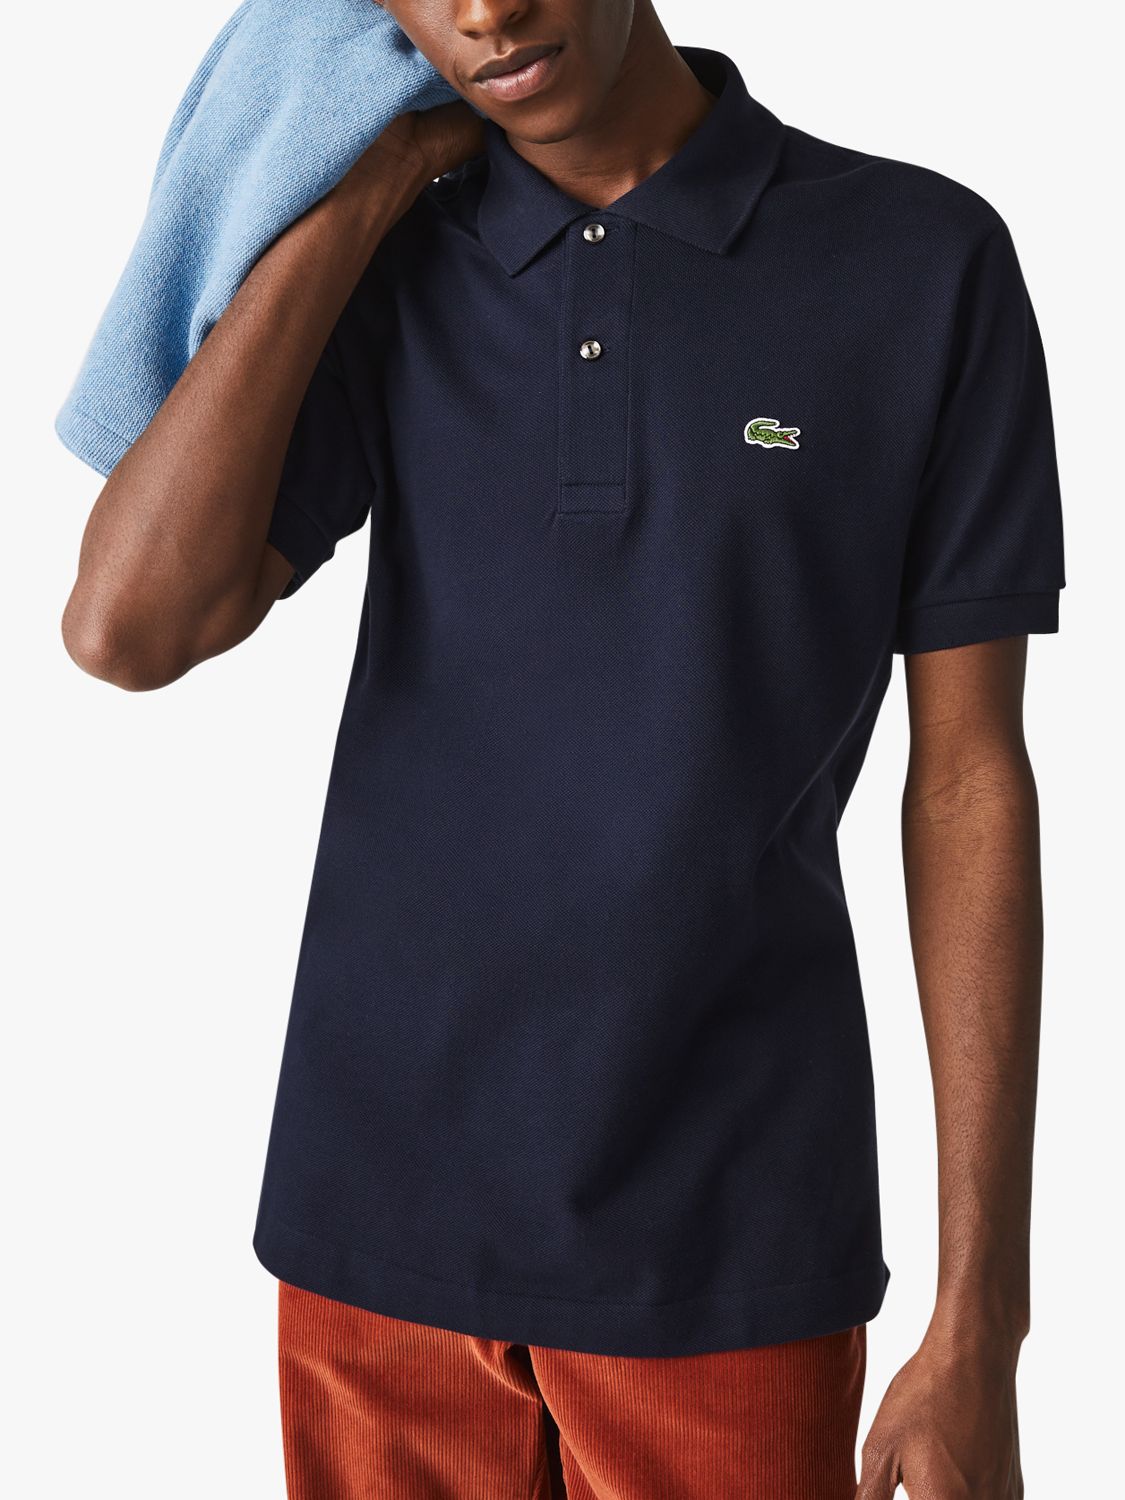 Lacoste L.12.12 Classic Regular Fit Sleeve Polo Navy at John Lewis & Partners